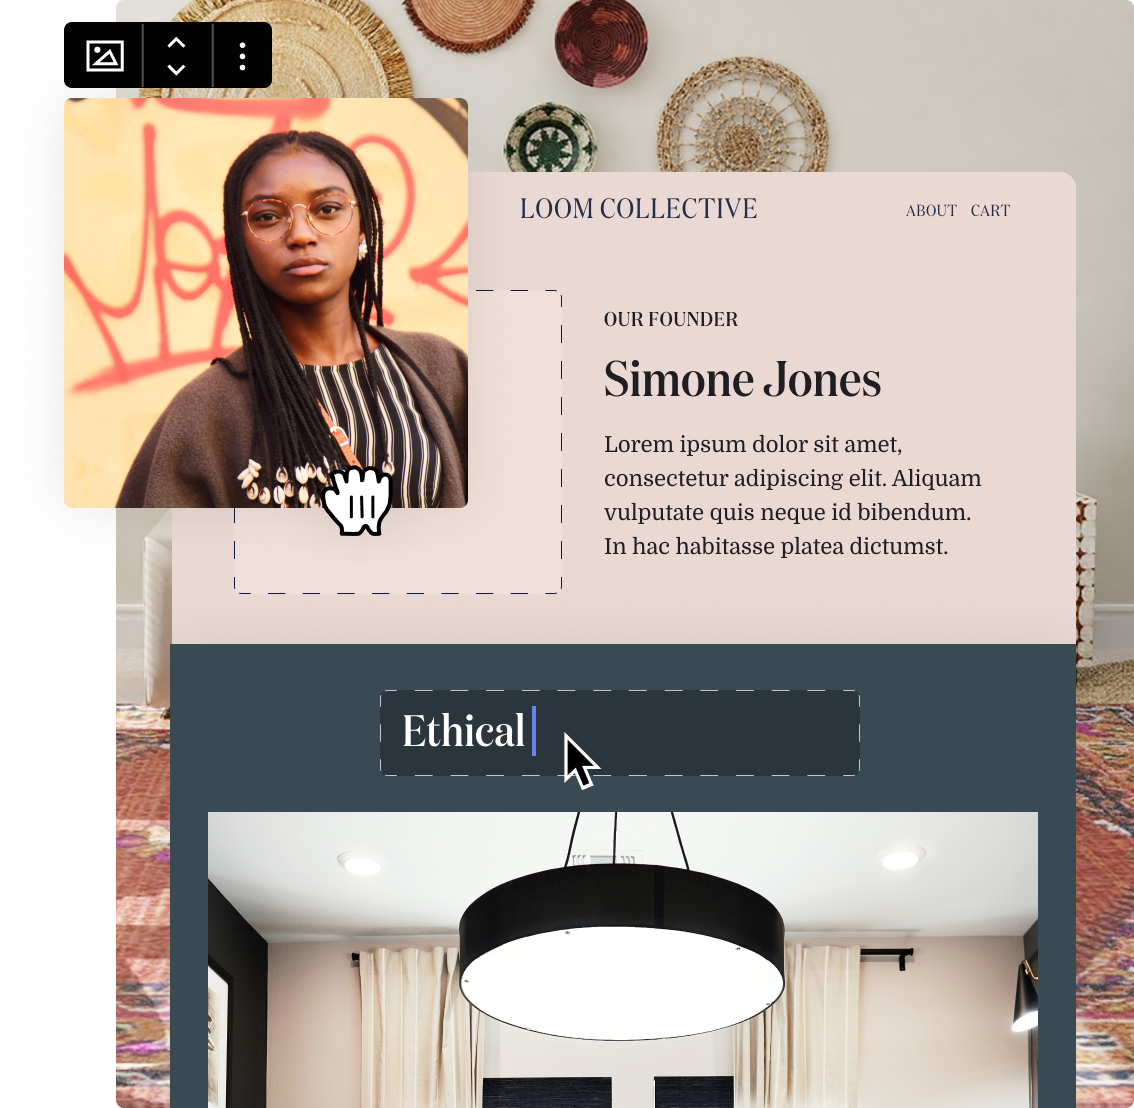 A cursor drags an image of the founder of a weaving collective, a woman named Simone Jones. User types in a headline about ethical practices